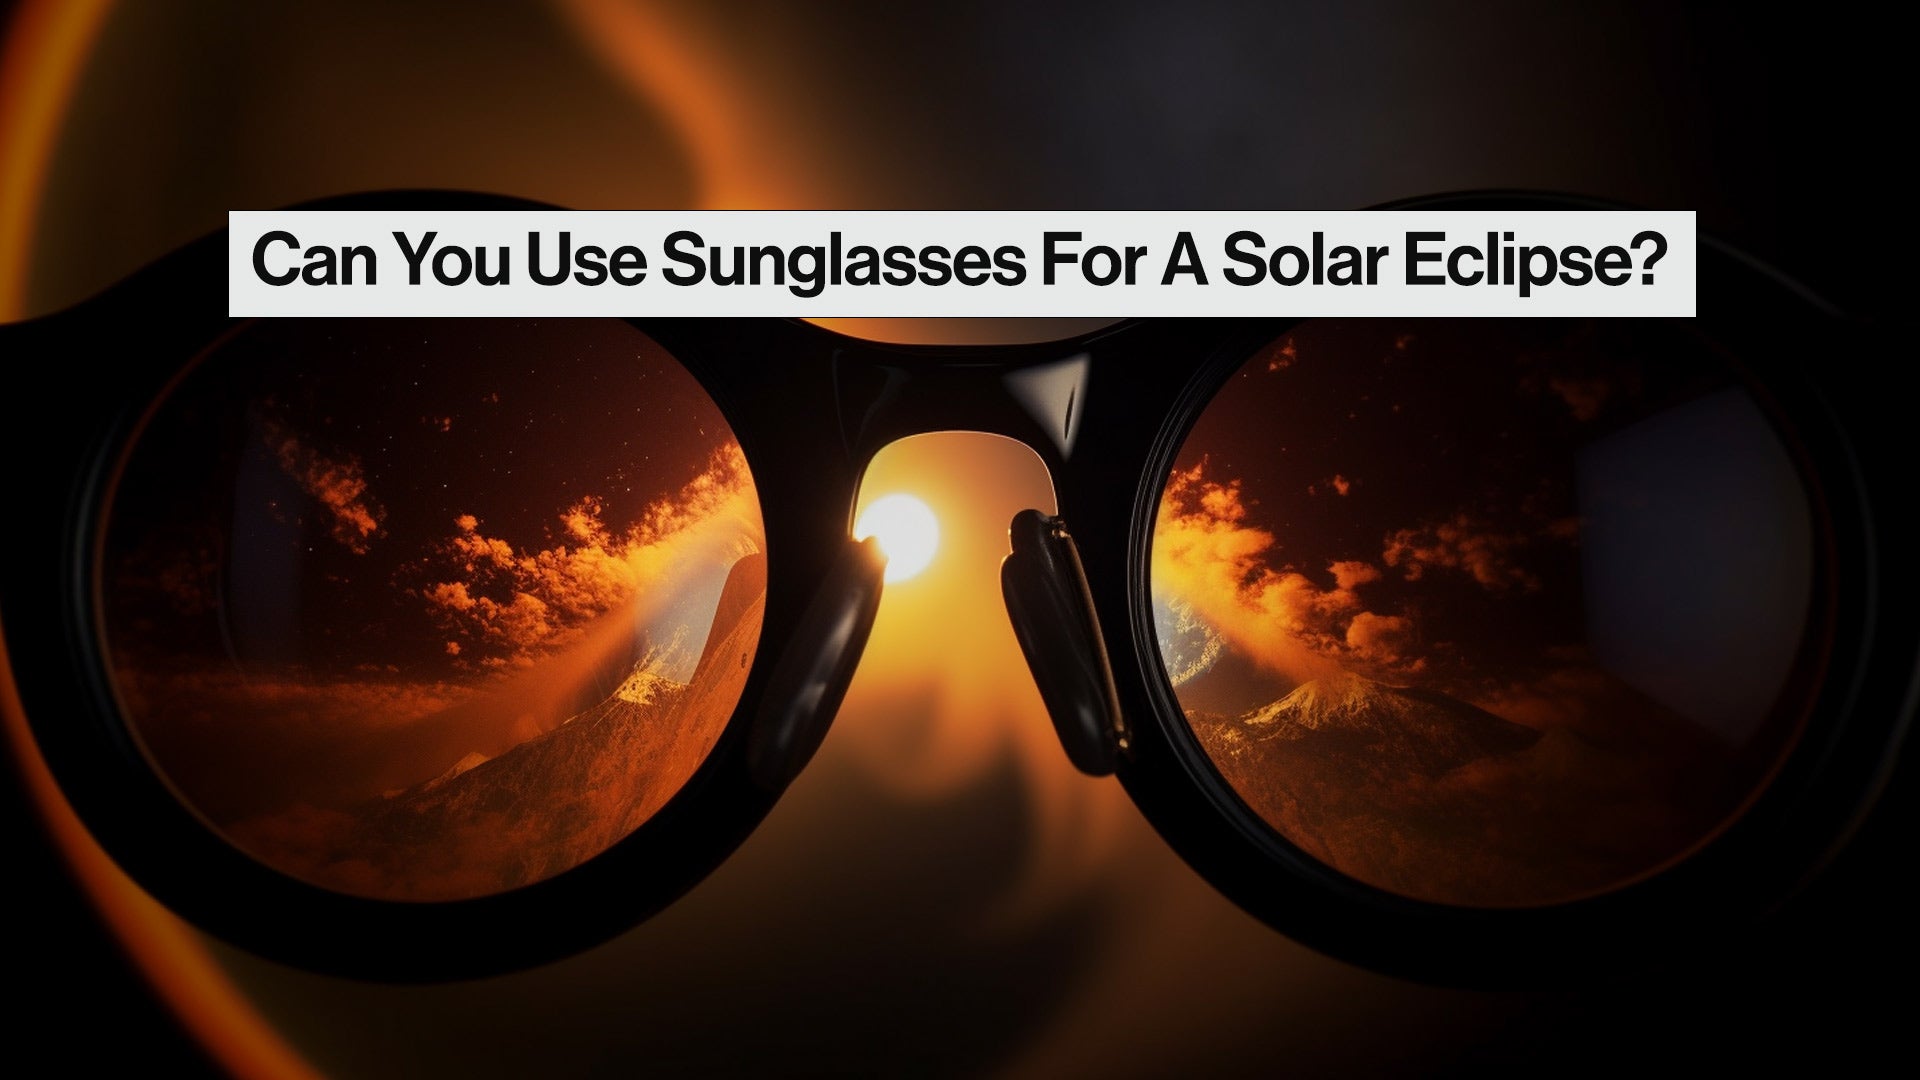 Can You Use Sunglasses For A Solar Eclipse?